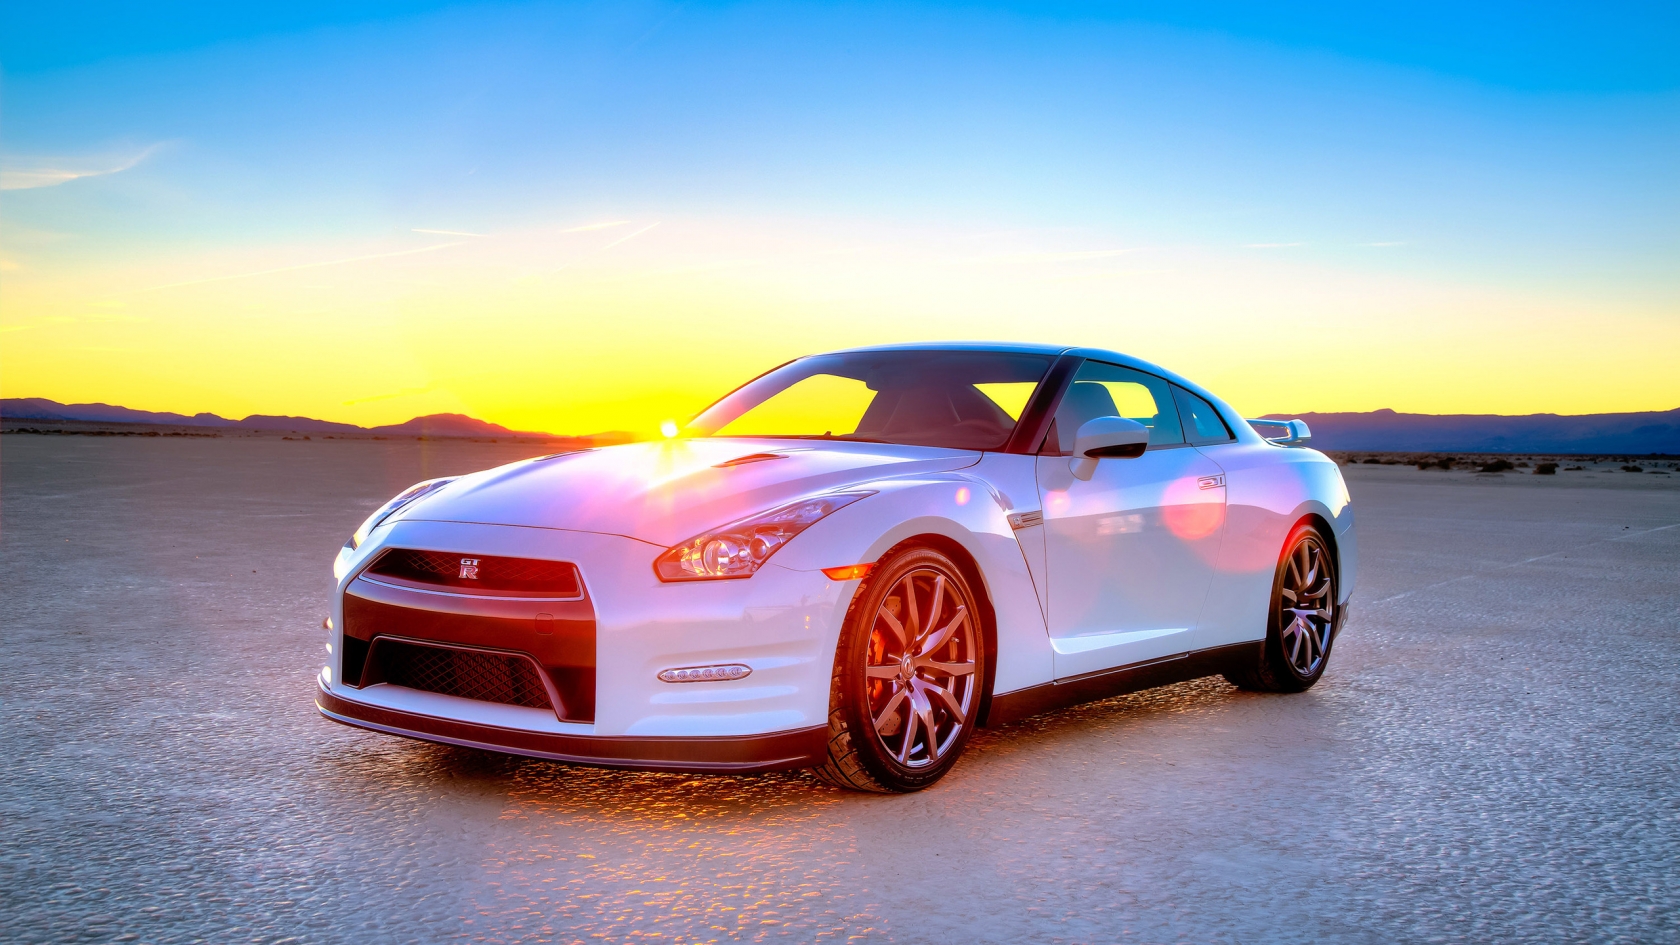 White Nissan GT-R 2014 Edition for 1680 x 945 HDTV resolution